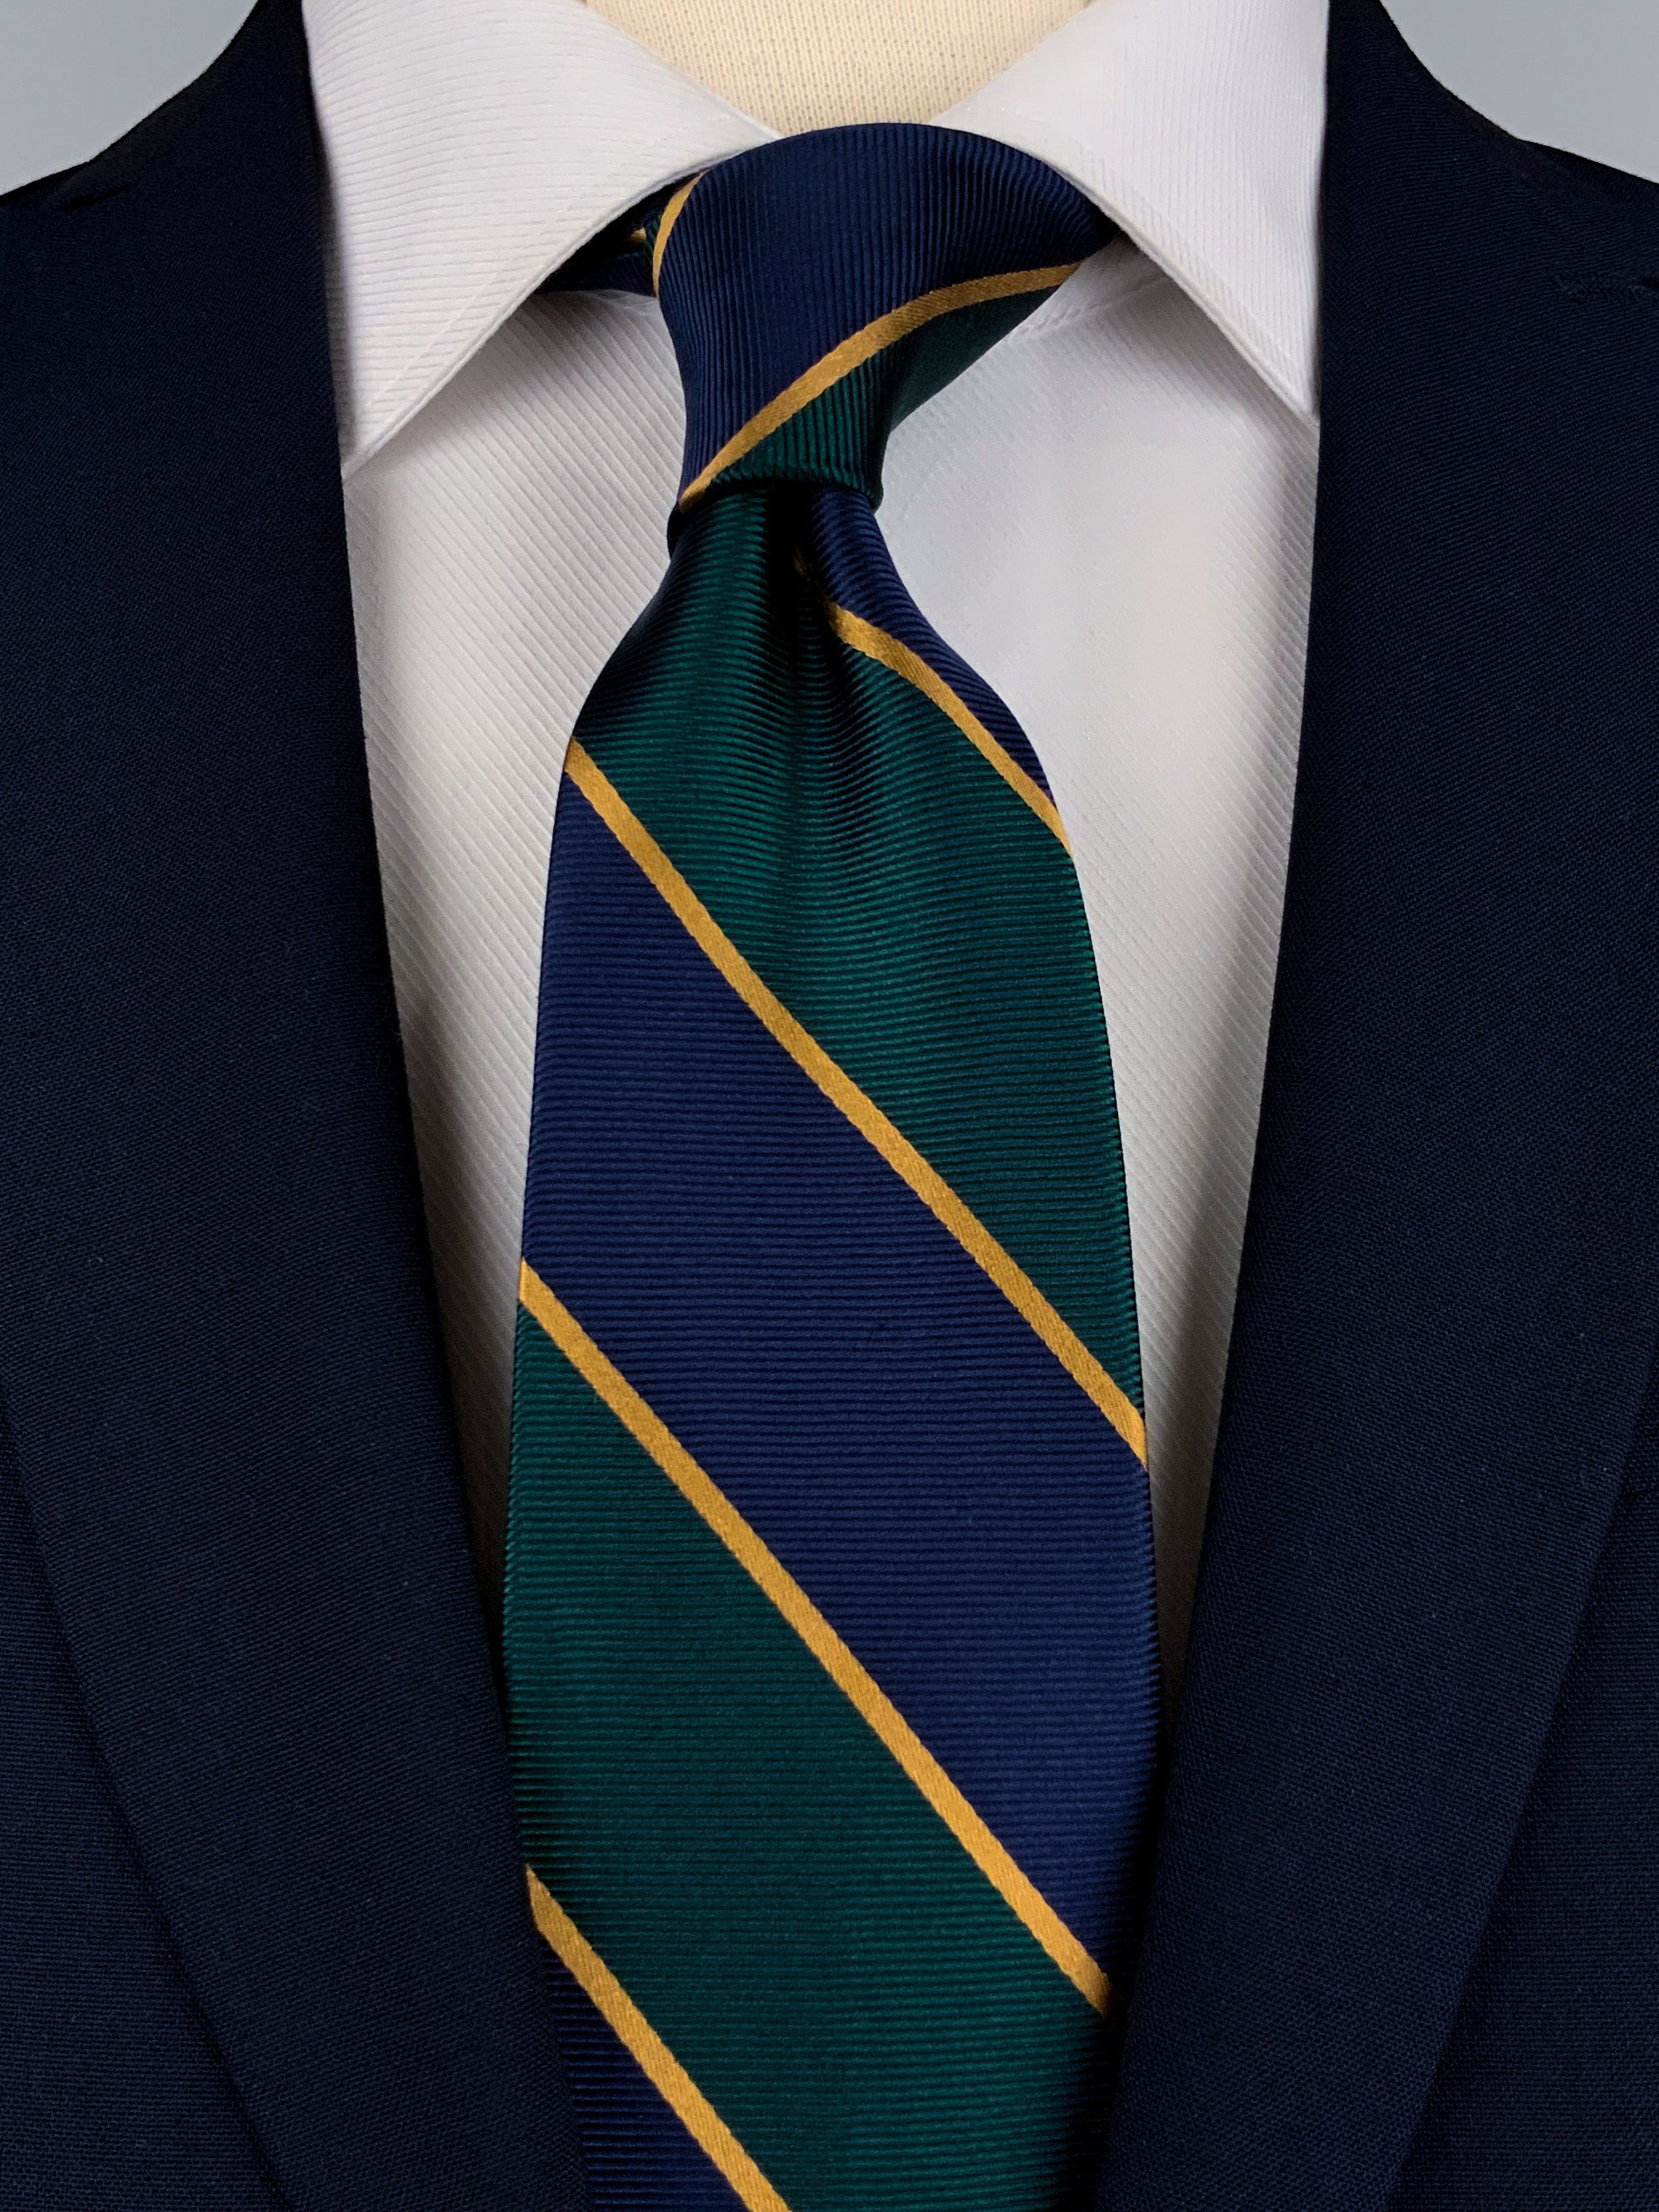 Mulberry silk twill tie with navy blue and dark emerald green regimental stripes and gold woven detailing worn with a white shirt and a navy blue suit